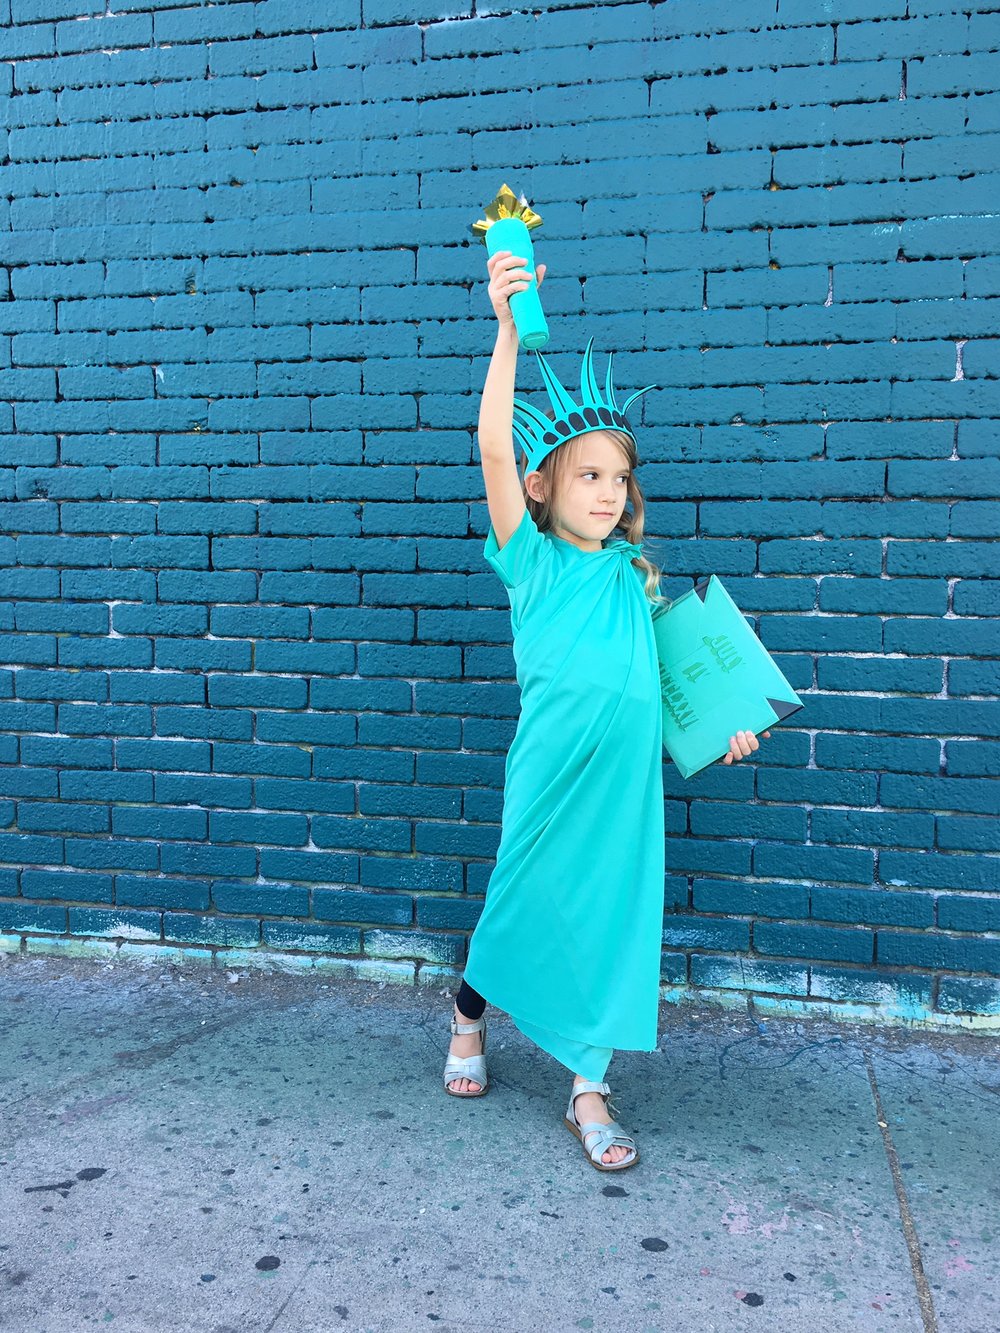 DIY Statue of Liberty Costume Feat. Her Right Foot — VICTORIA ANN MEYERS